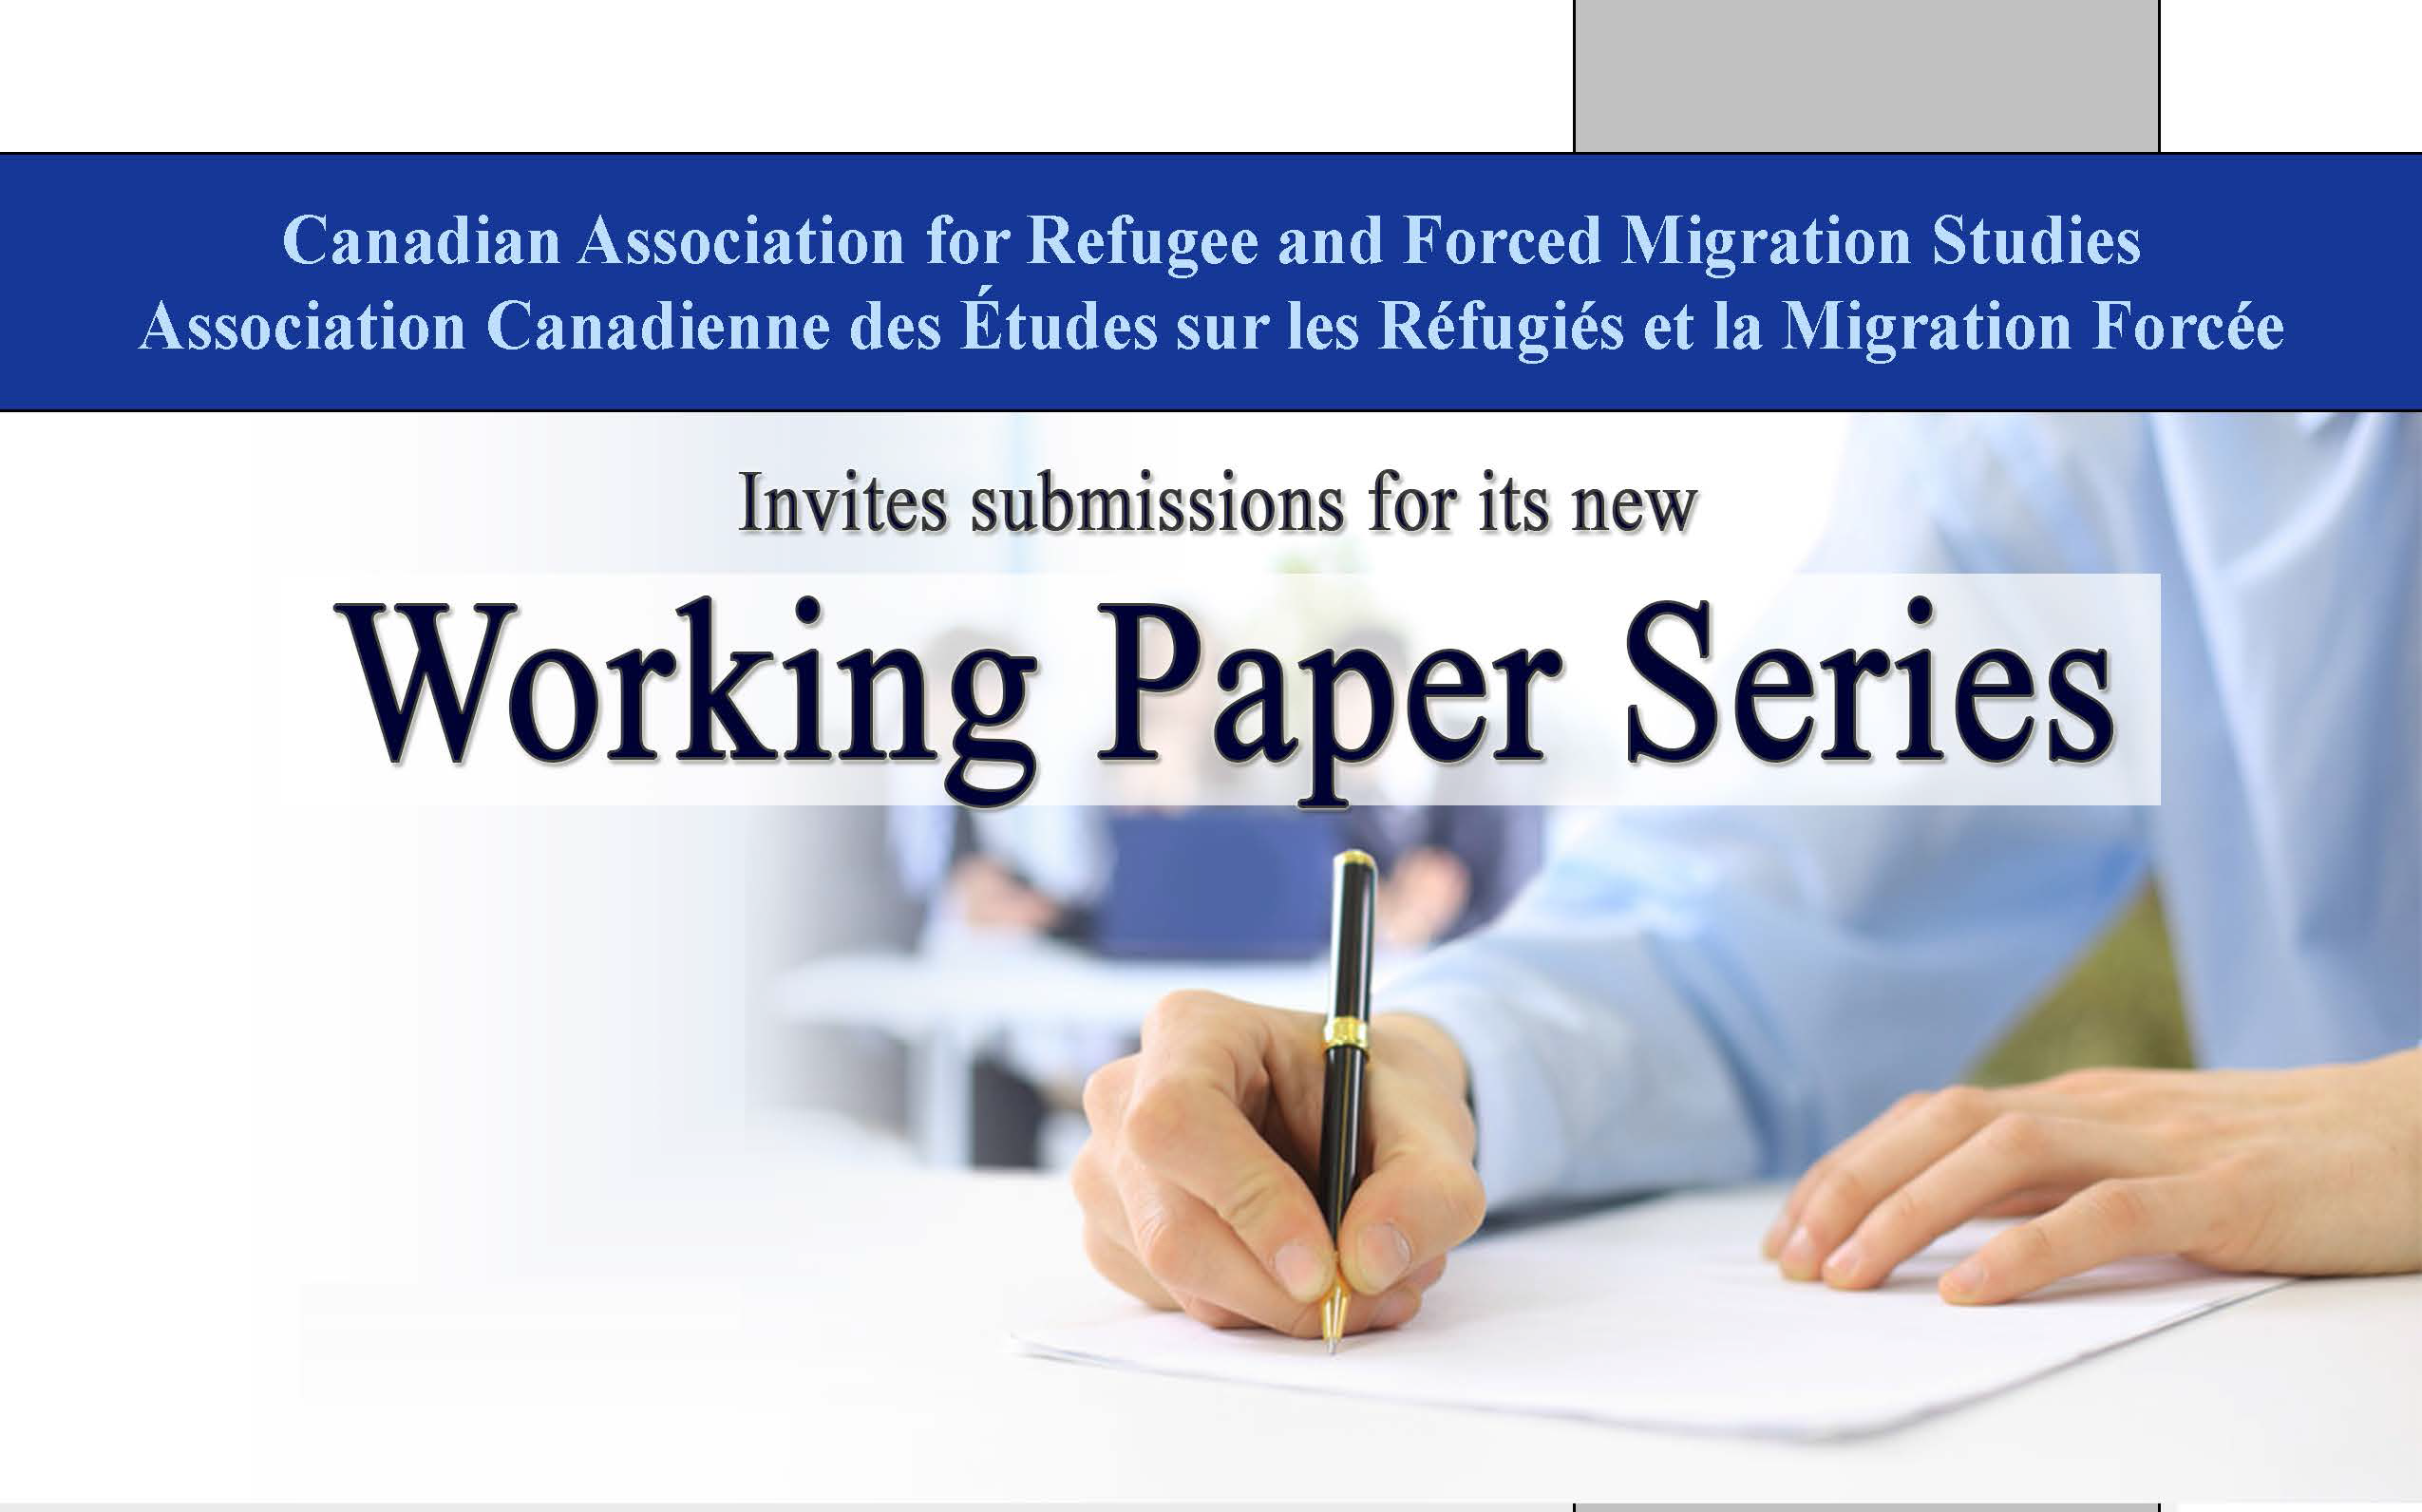 New working paper by Dr. Stephanie J. Silverman and Ben Lewis